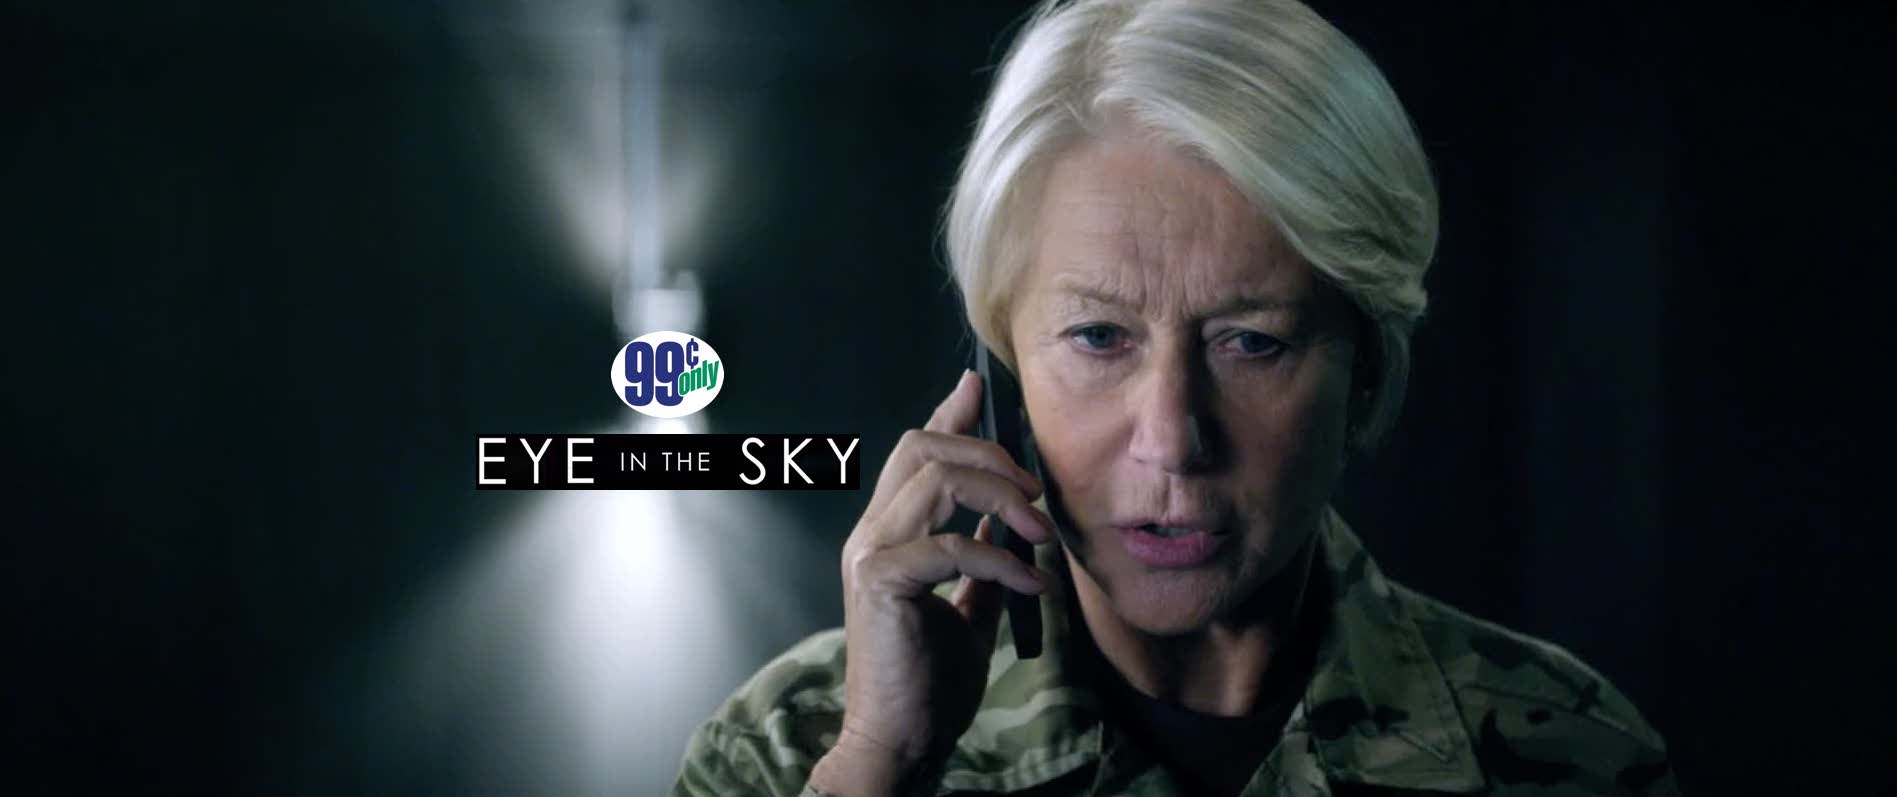 Geek insider, geekinsider, geekinsider. Com,, the itunes 99 cent movie of the week: 'eye in the sky', entertainment